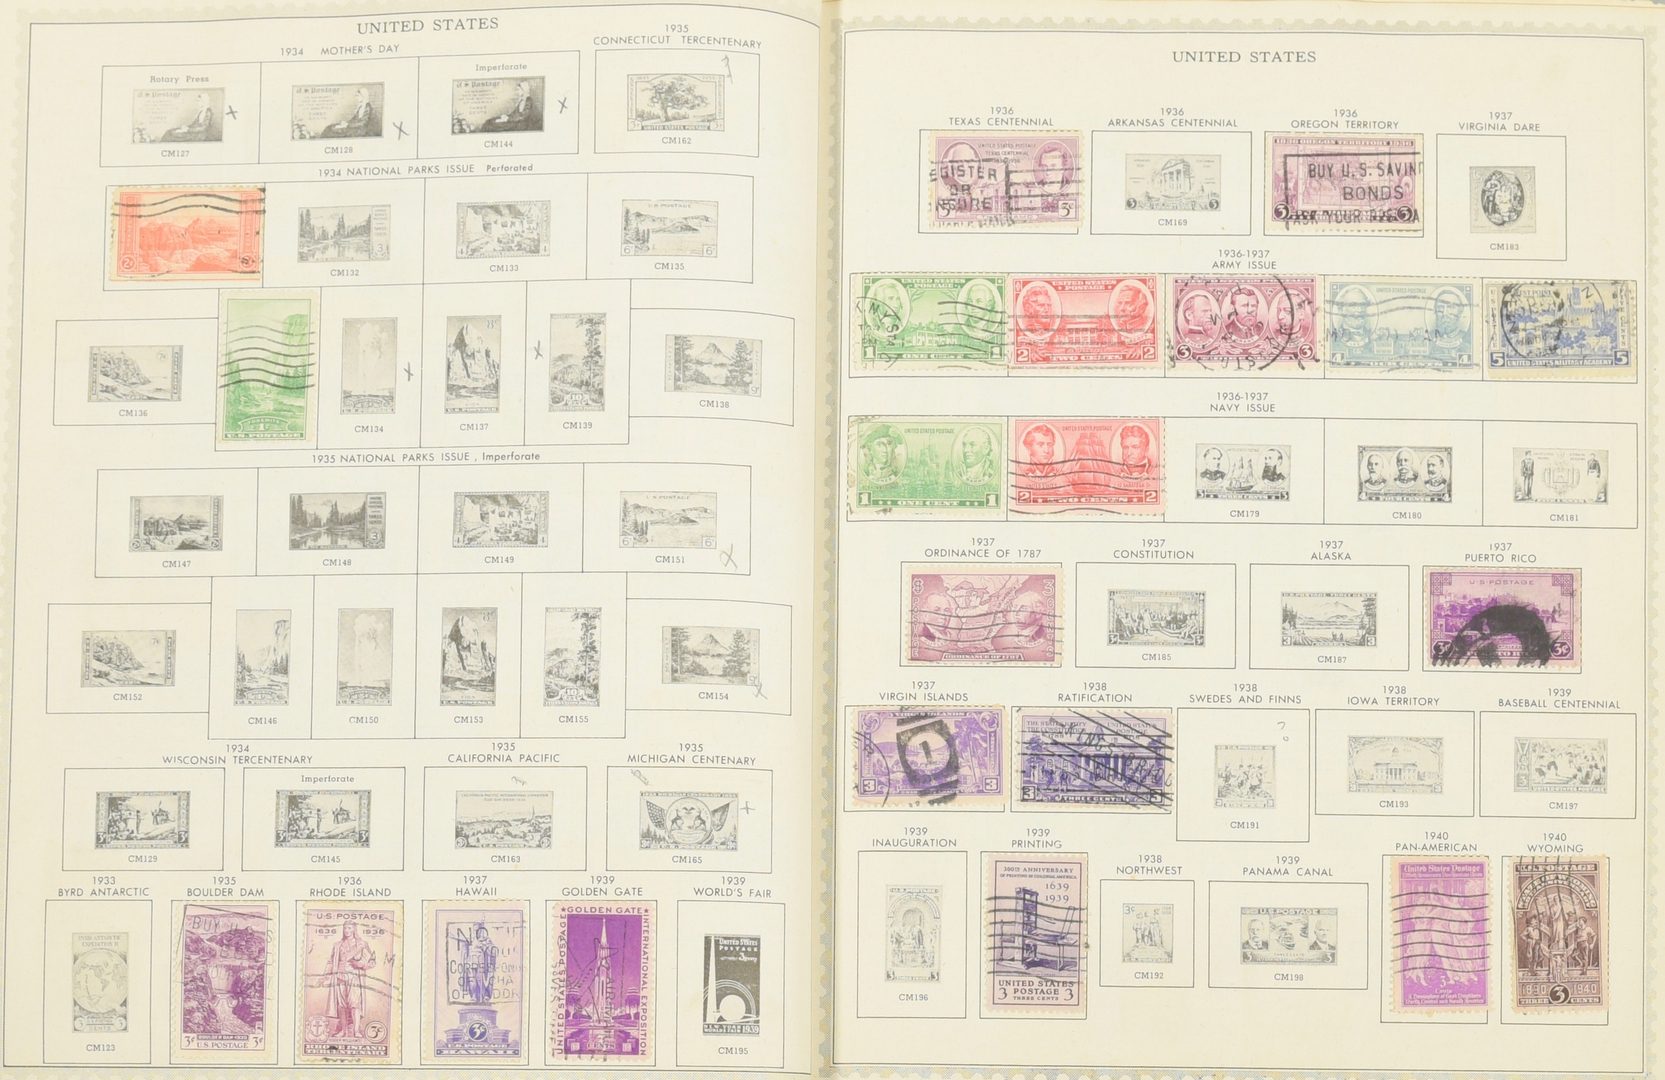 Lot 754: Collection of United States and World Stamp and Stamp Covers, c. 1881-1997